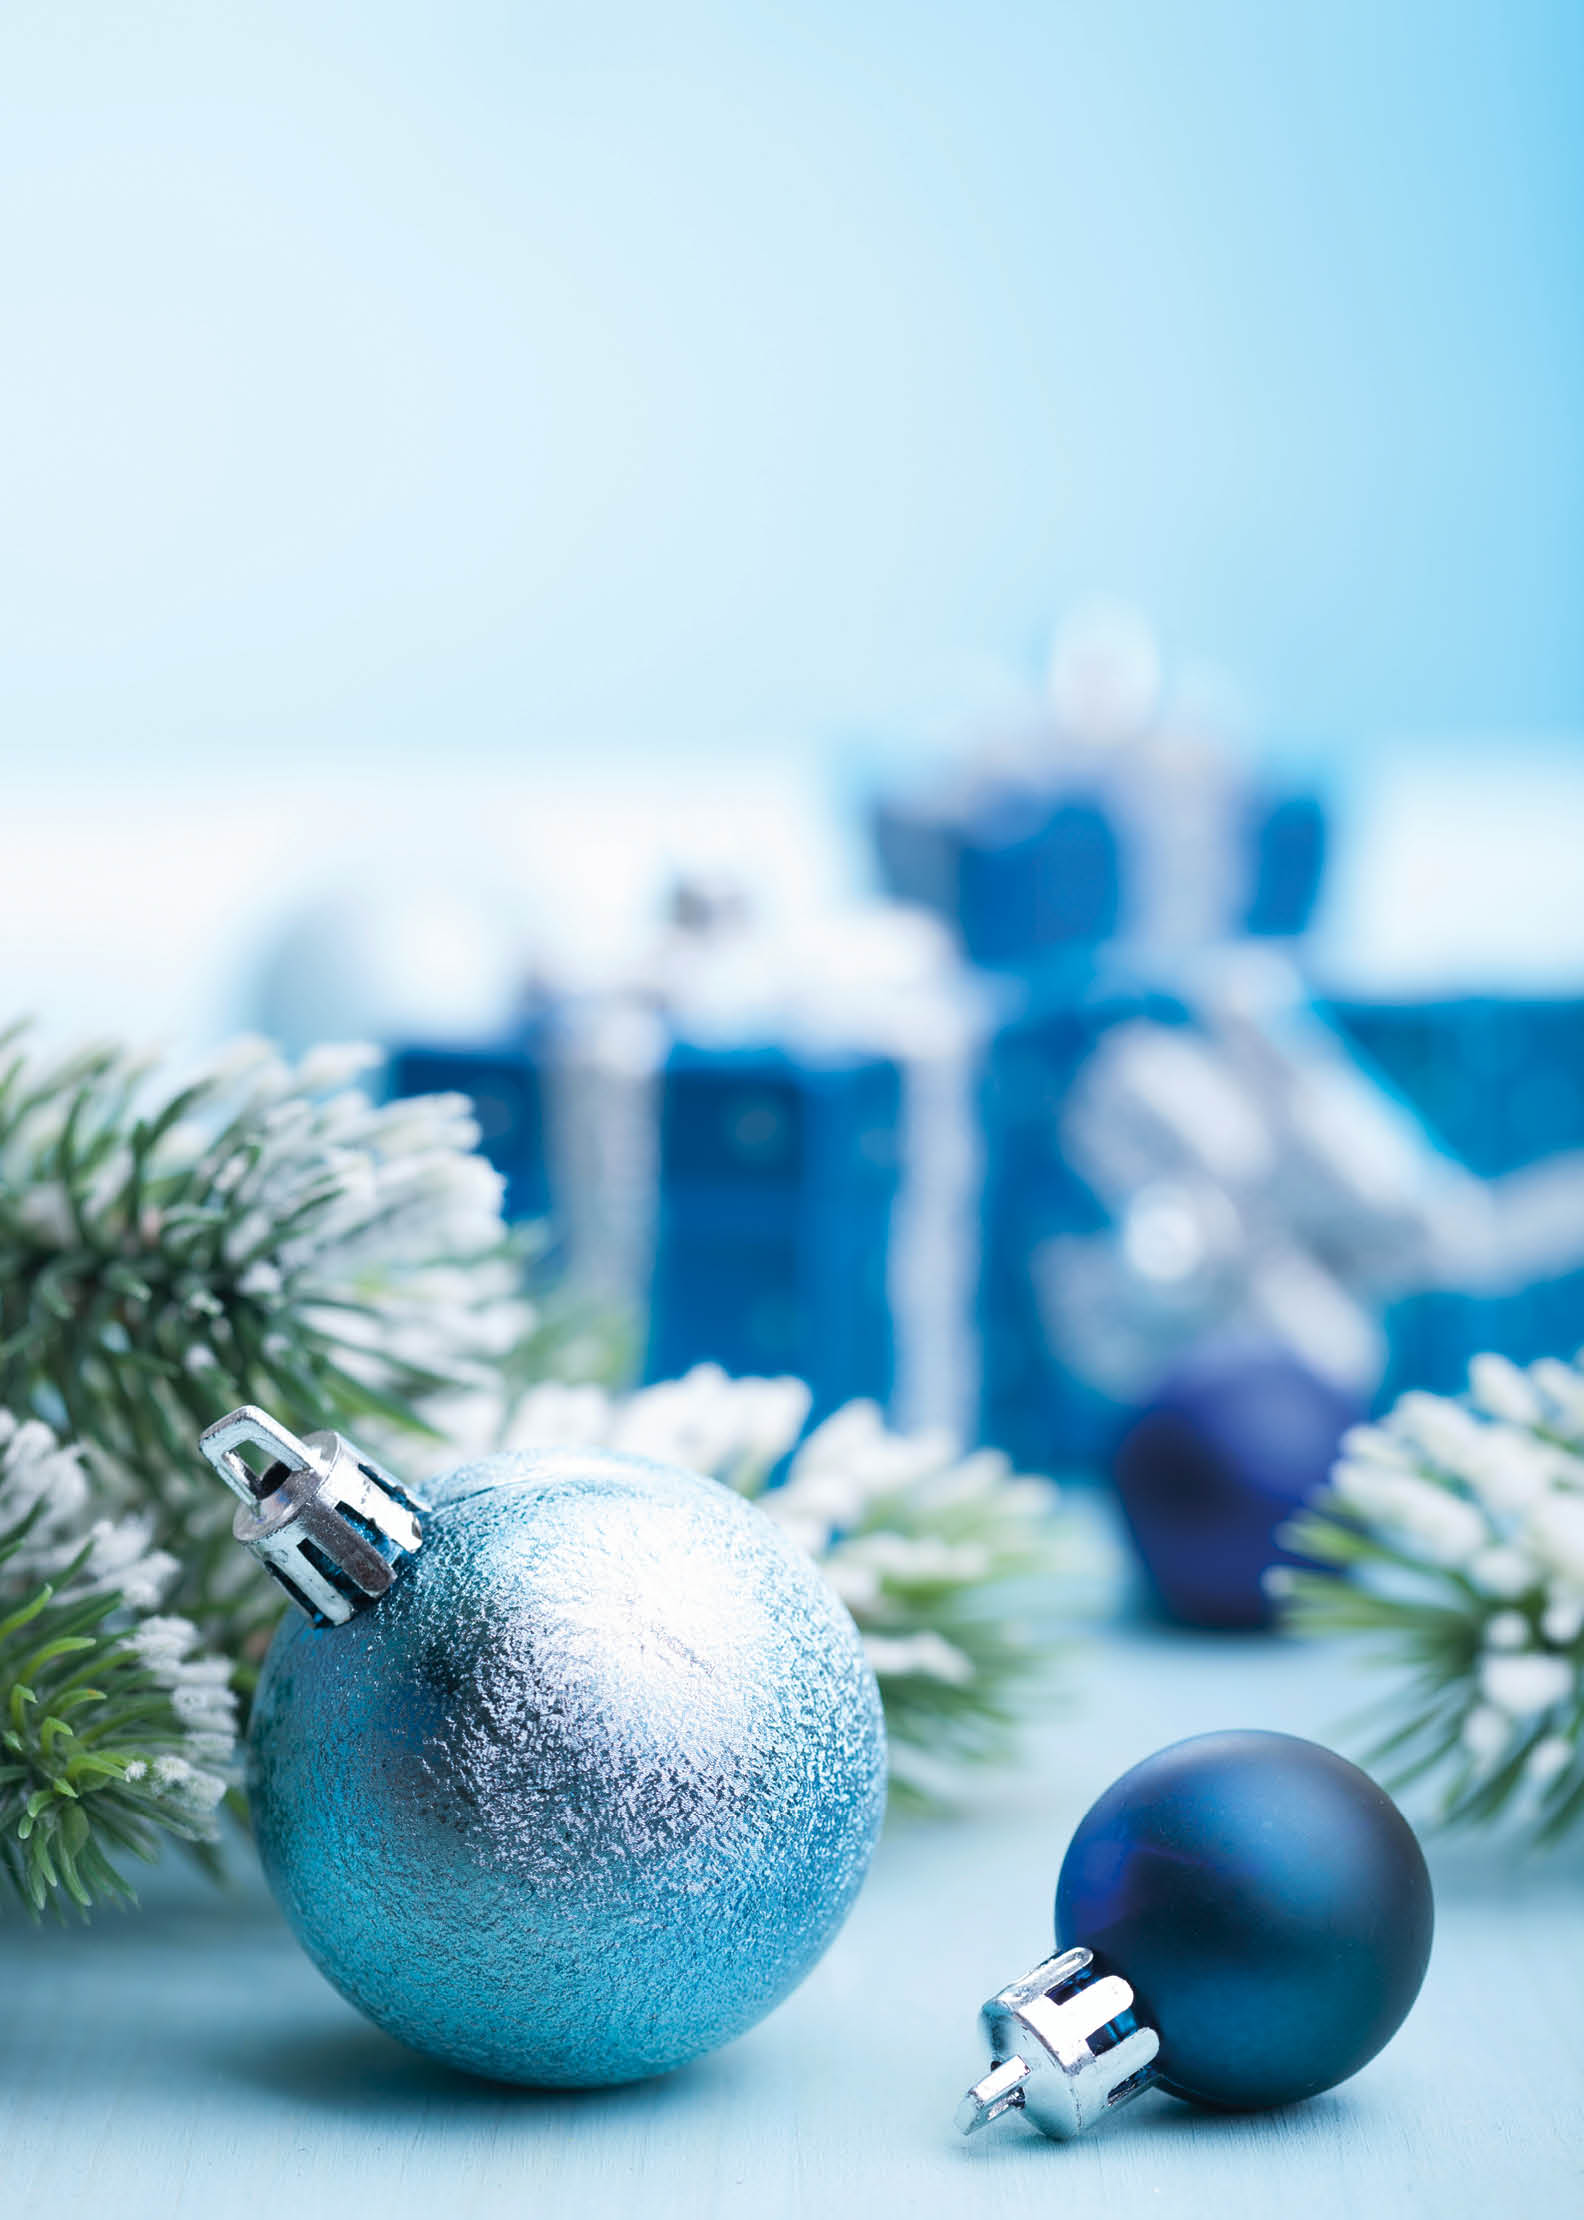 blue christmas gifts and decoration